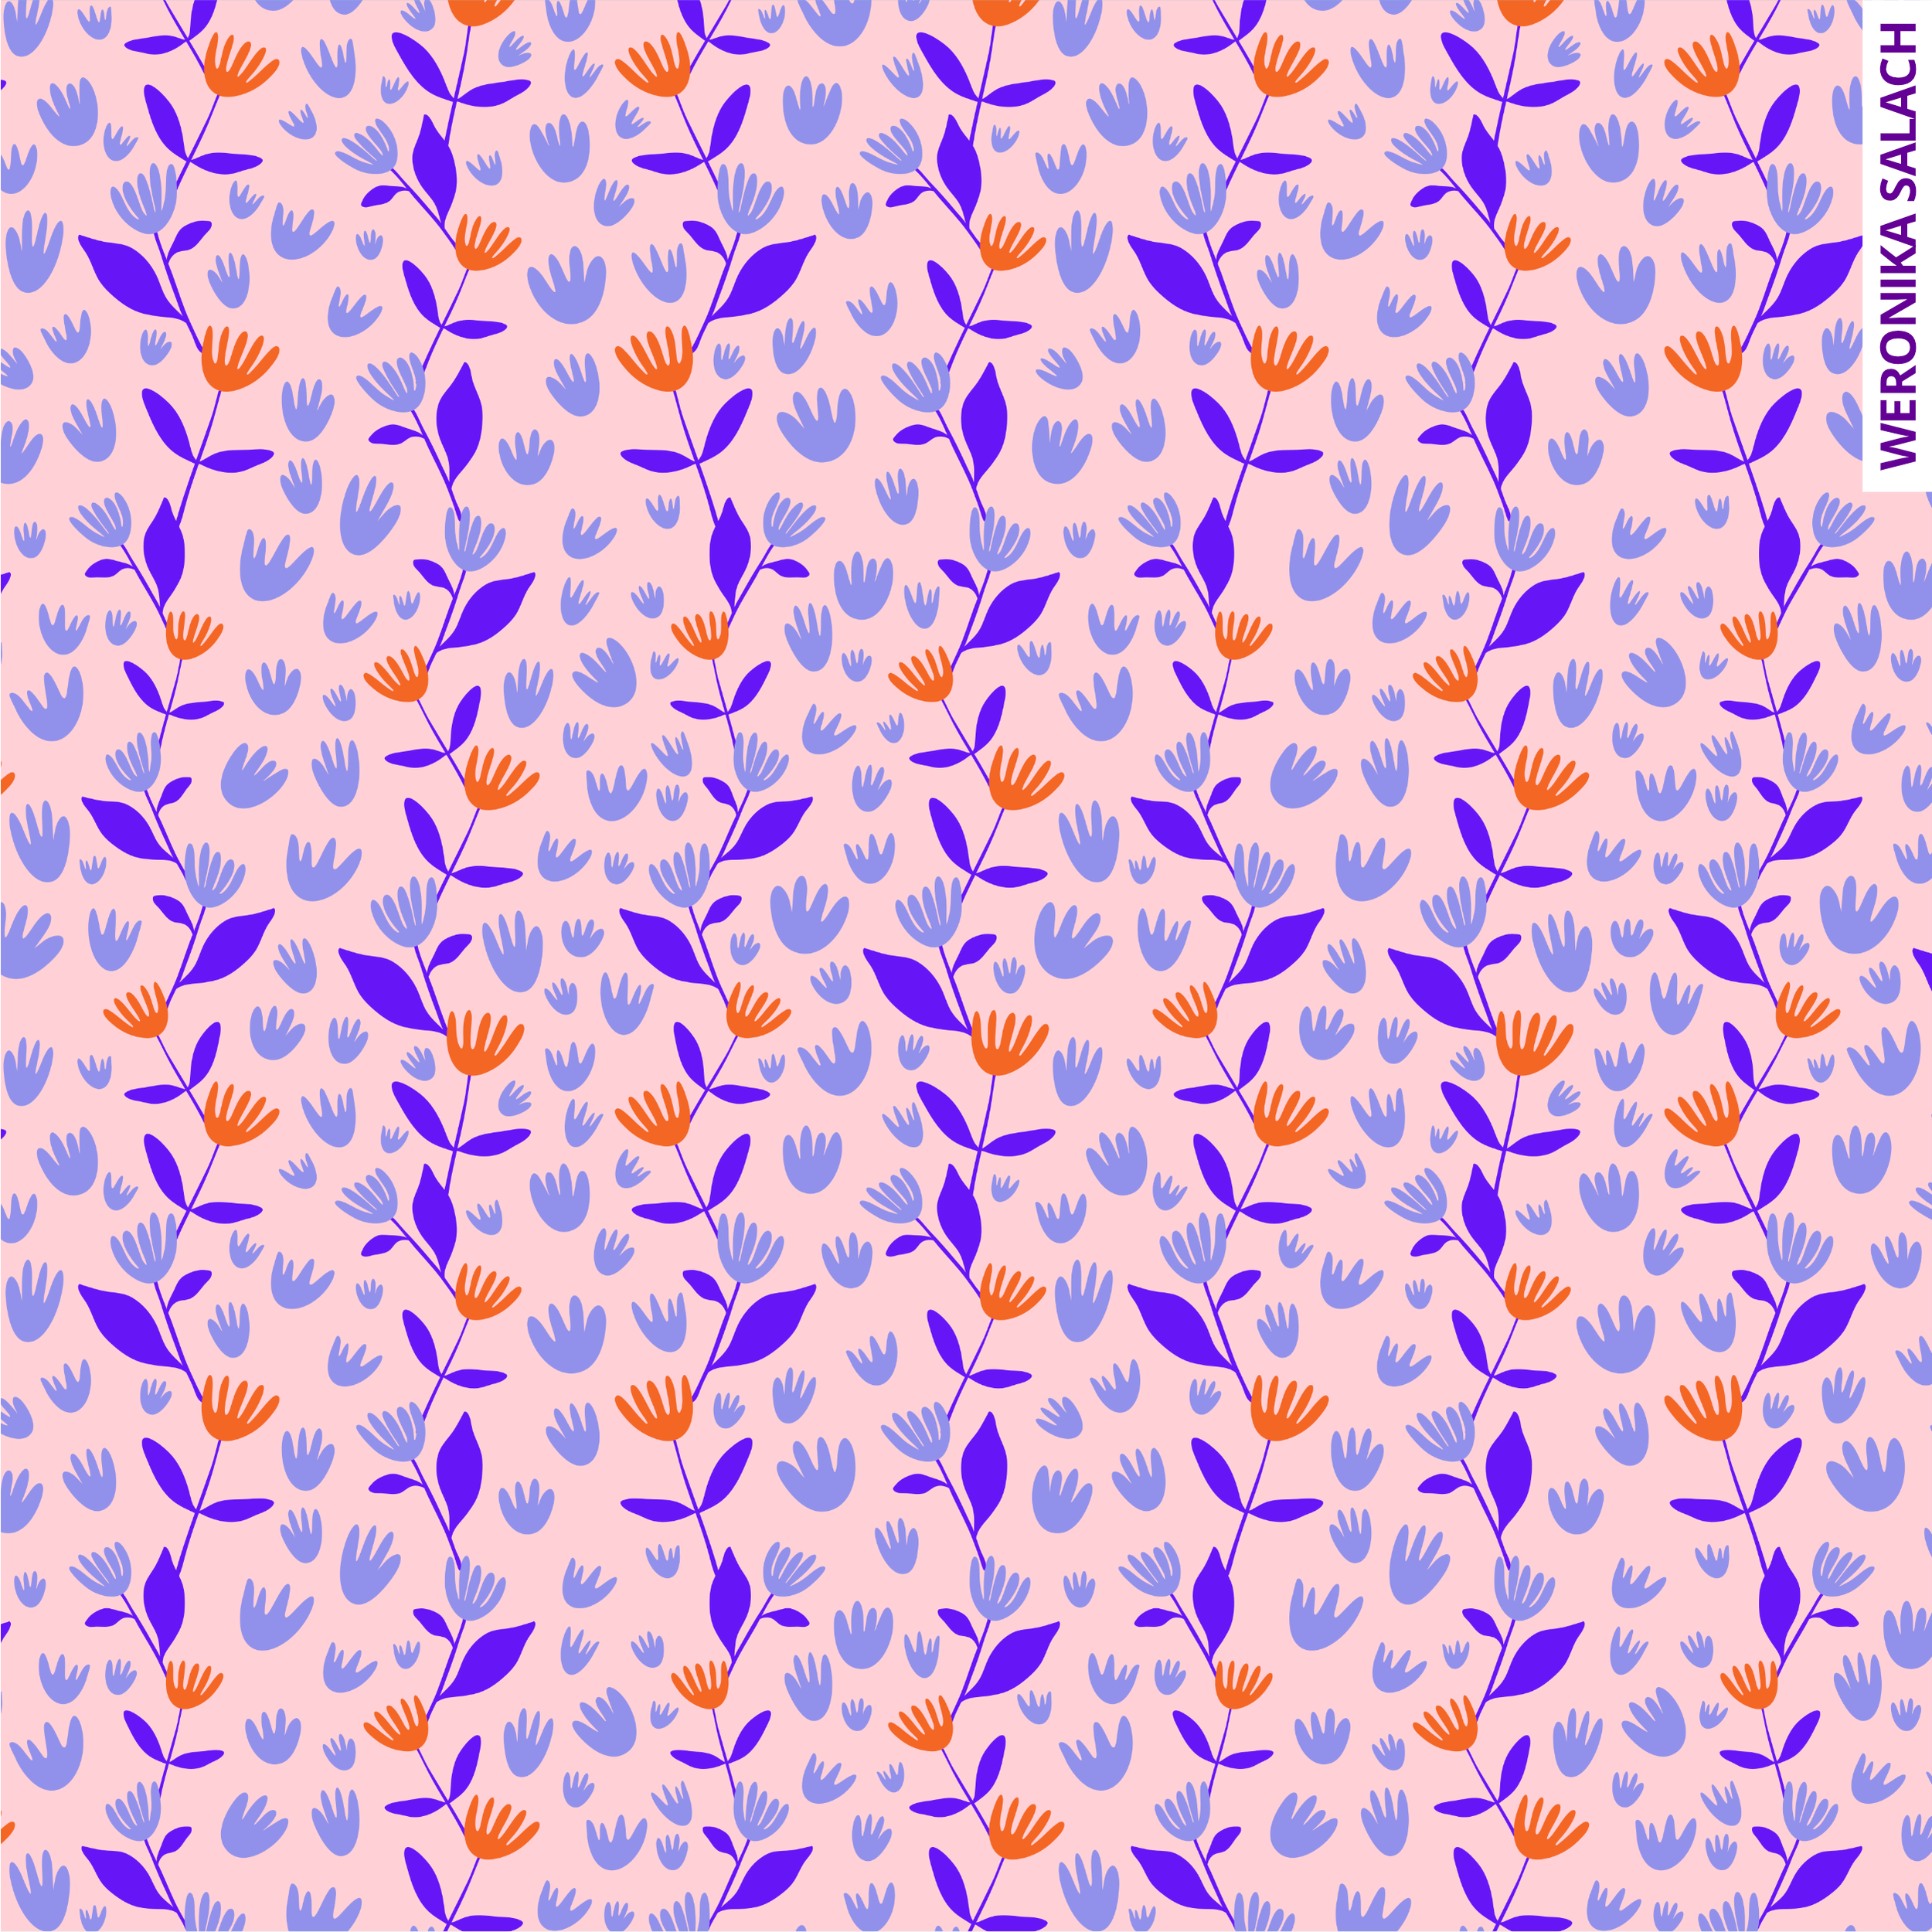 WS_repeat pattern_spring ditsy vibrant.png